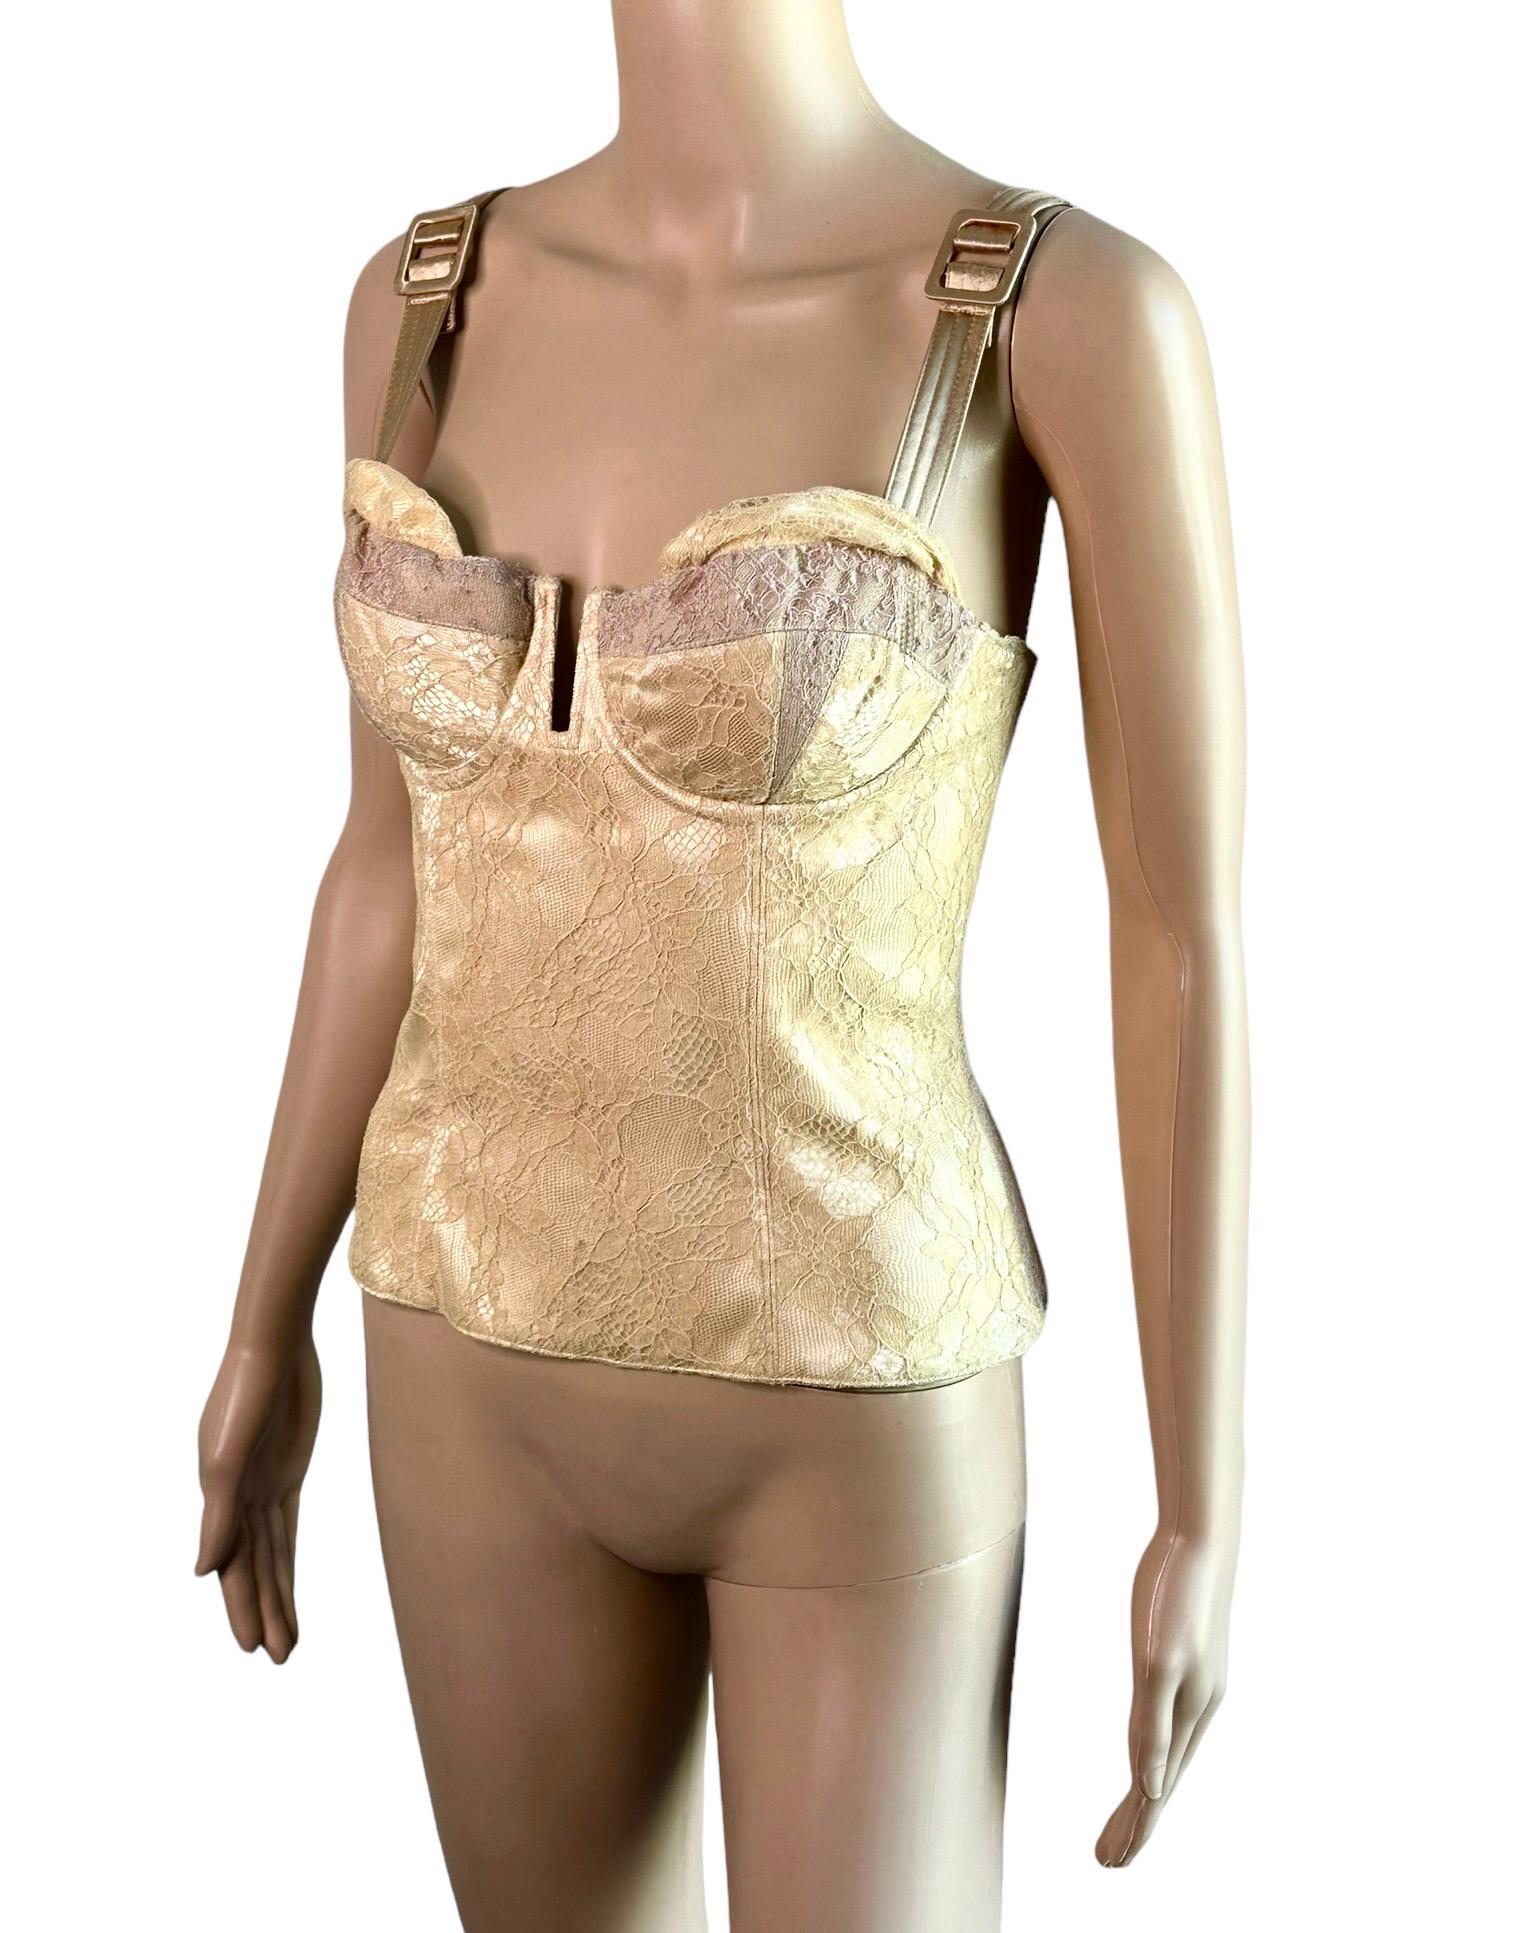 Beige Christian Dior By John Galliano S/S 2004 Runway Bustier Lace Corset Crop Top For Sale